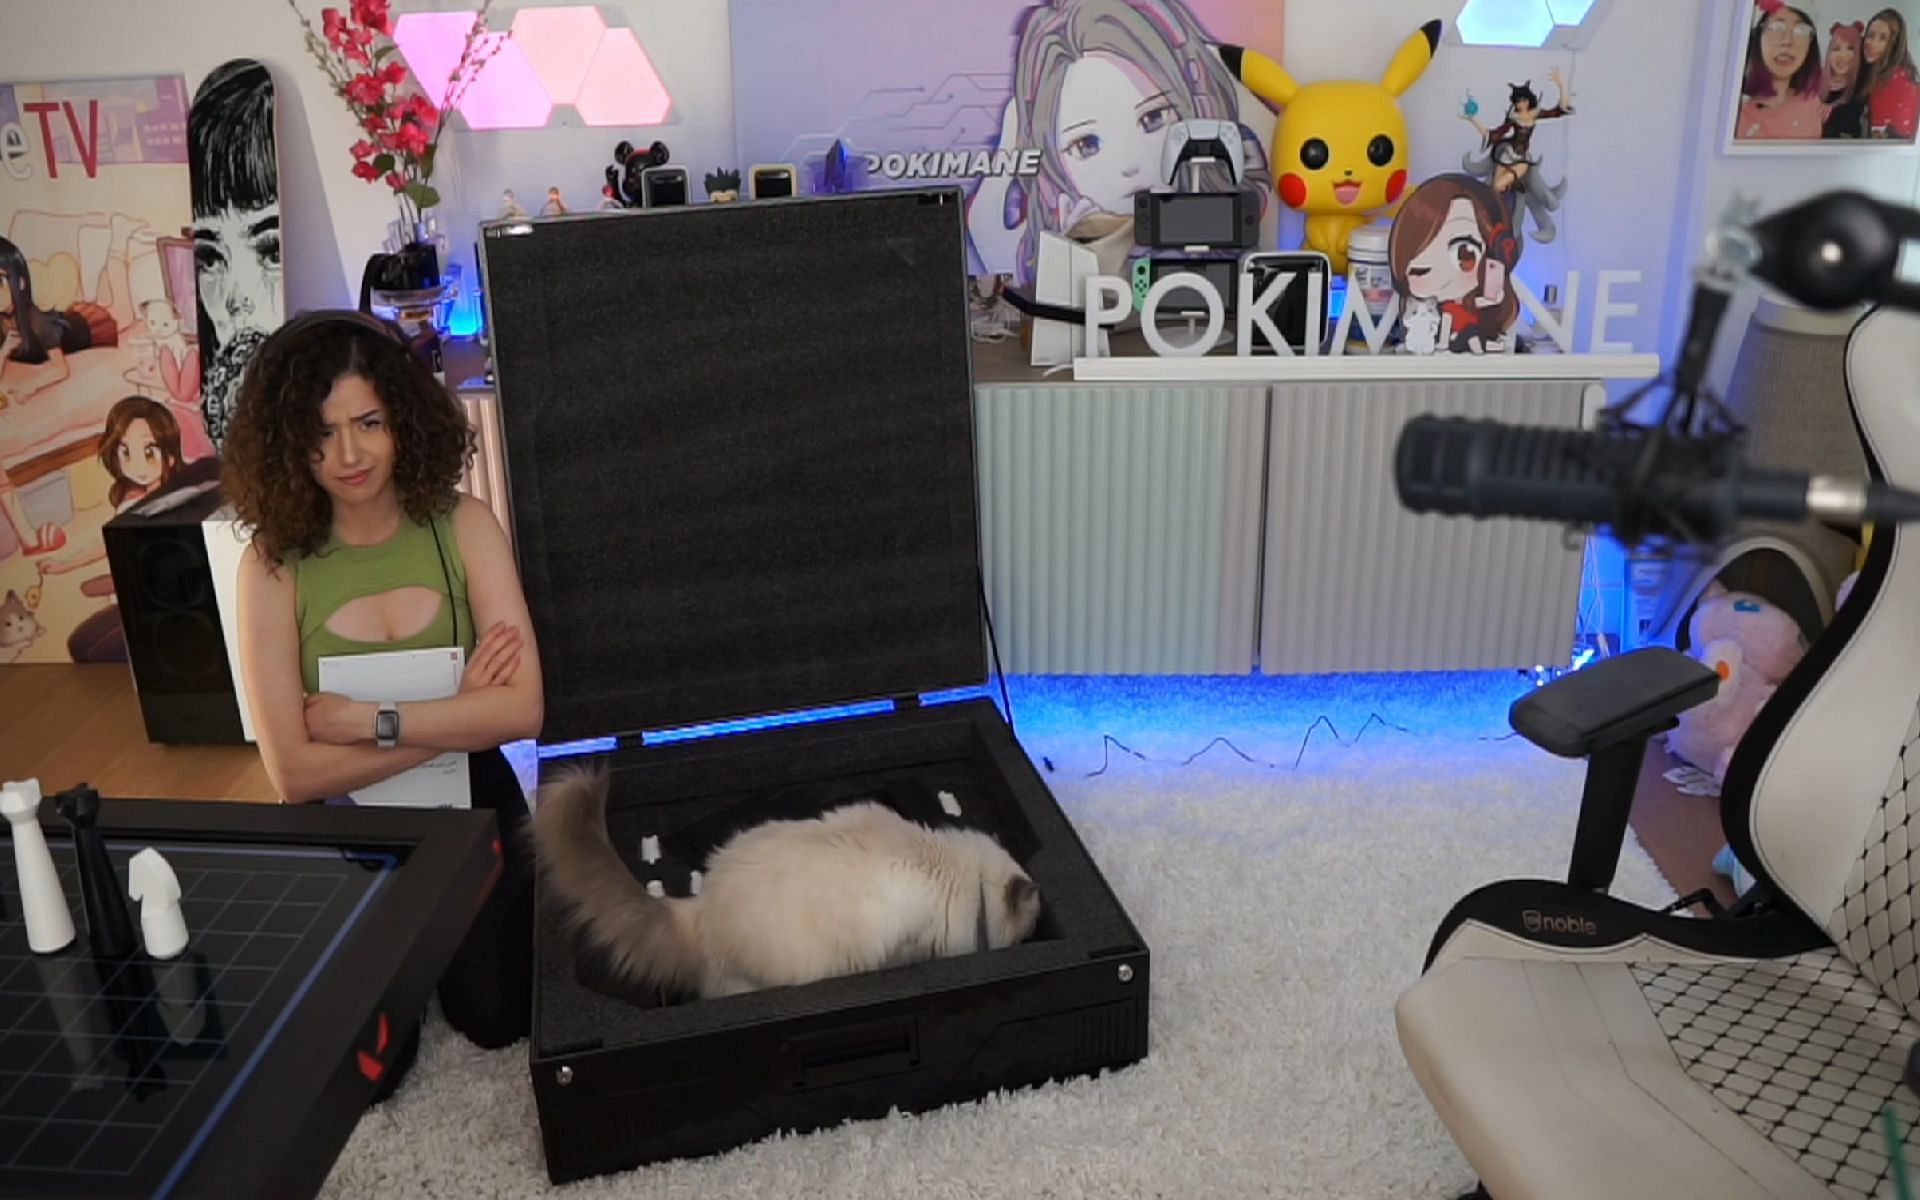 Pokimane&#039;s cat Mimi steals the show as the streamer unboxes goodies (Images via Pokimane/Twitch)